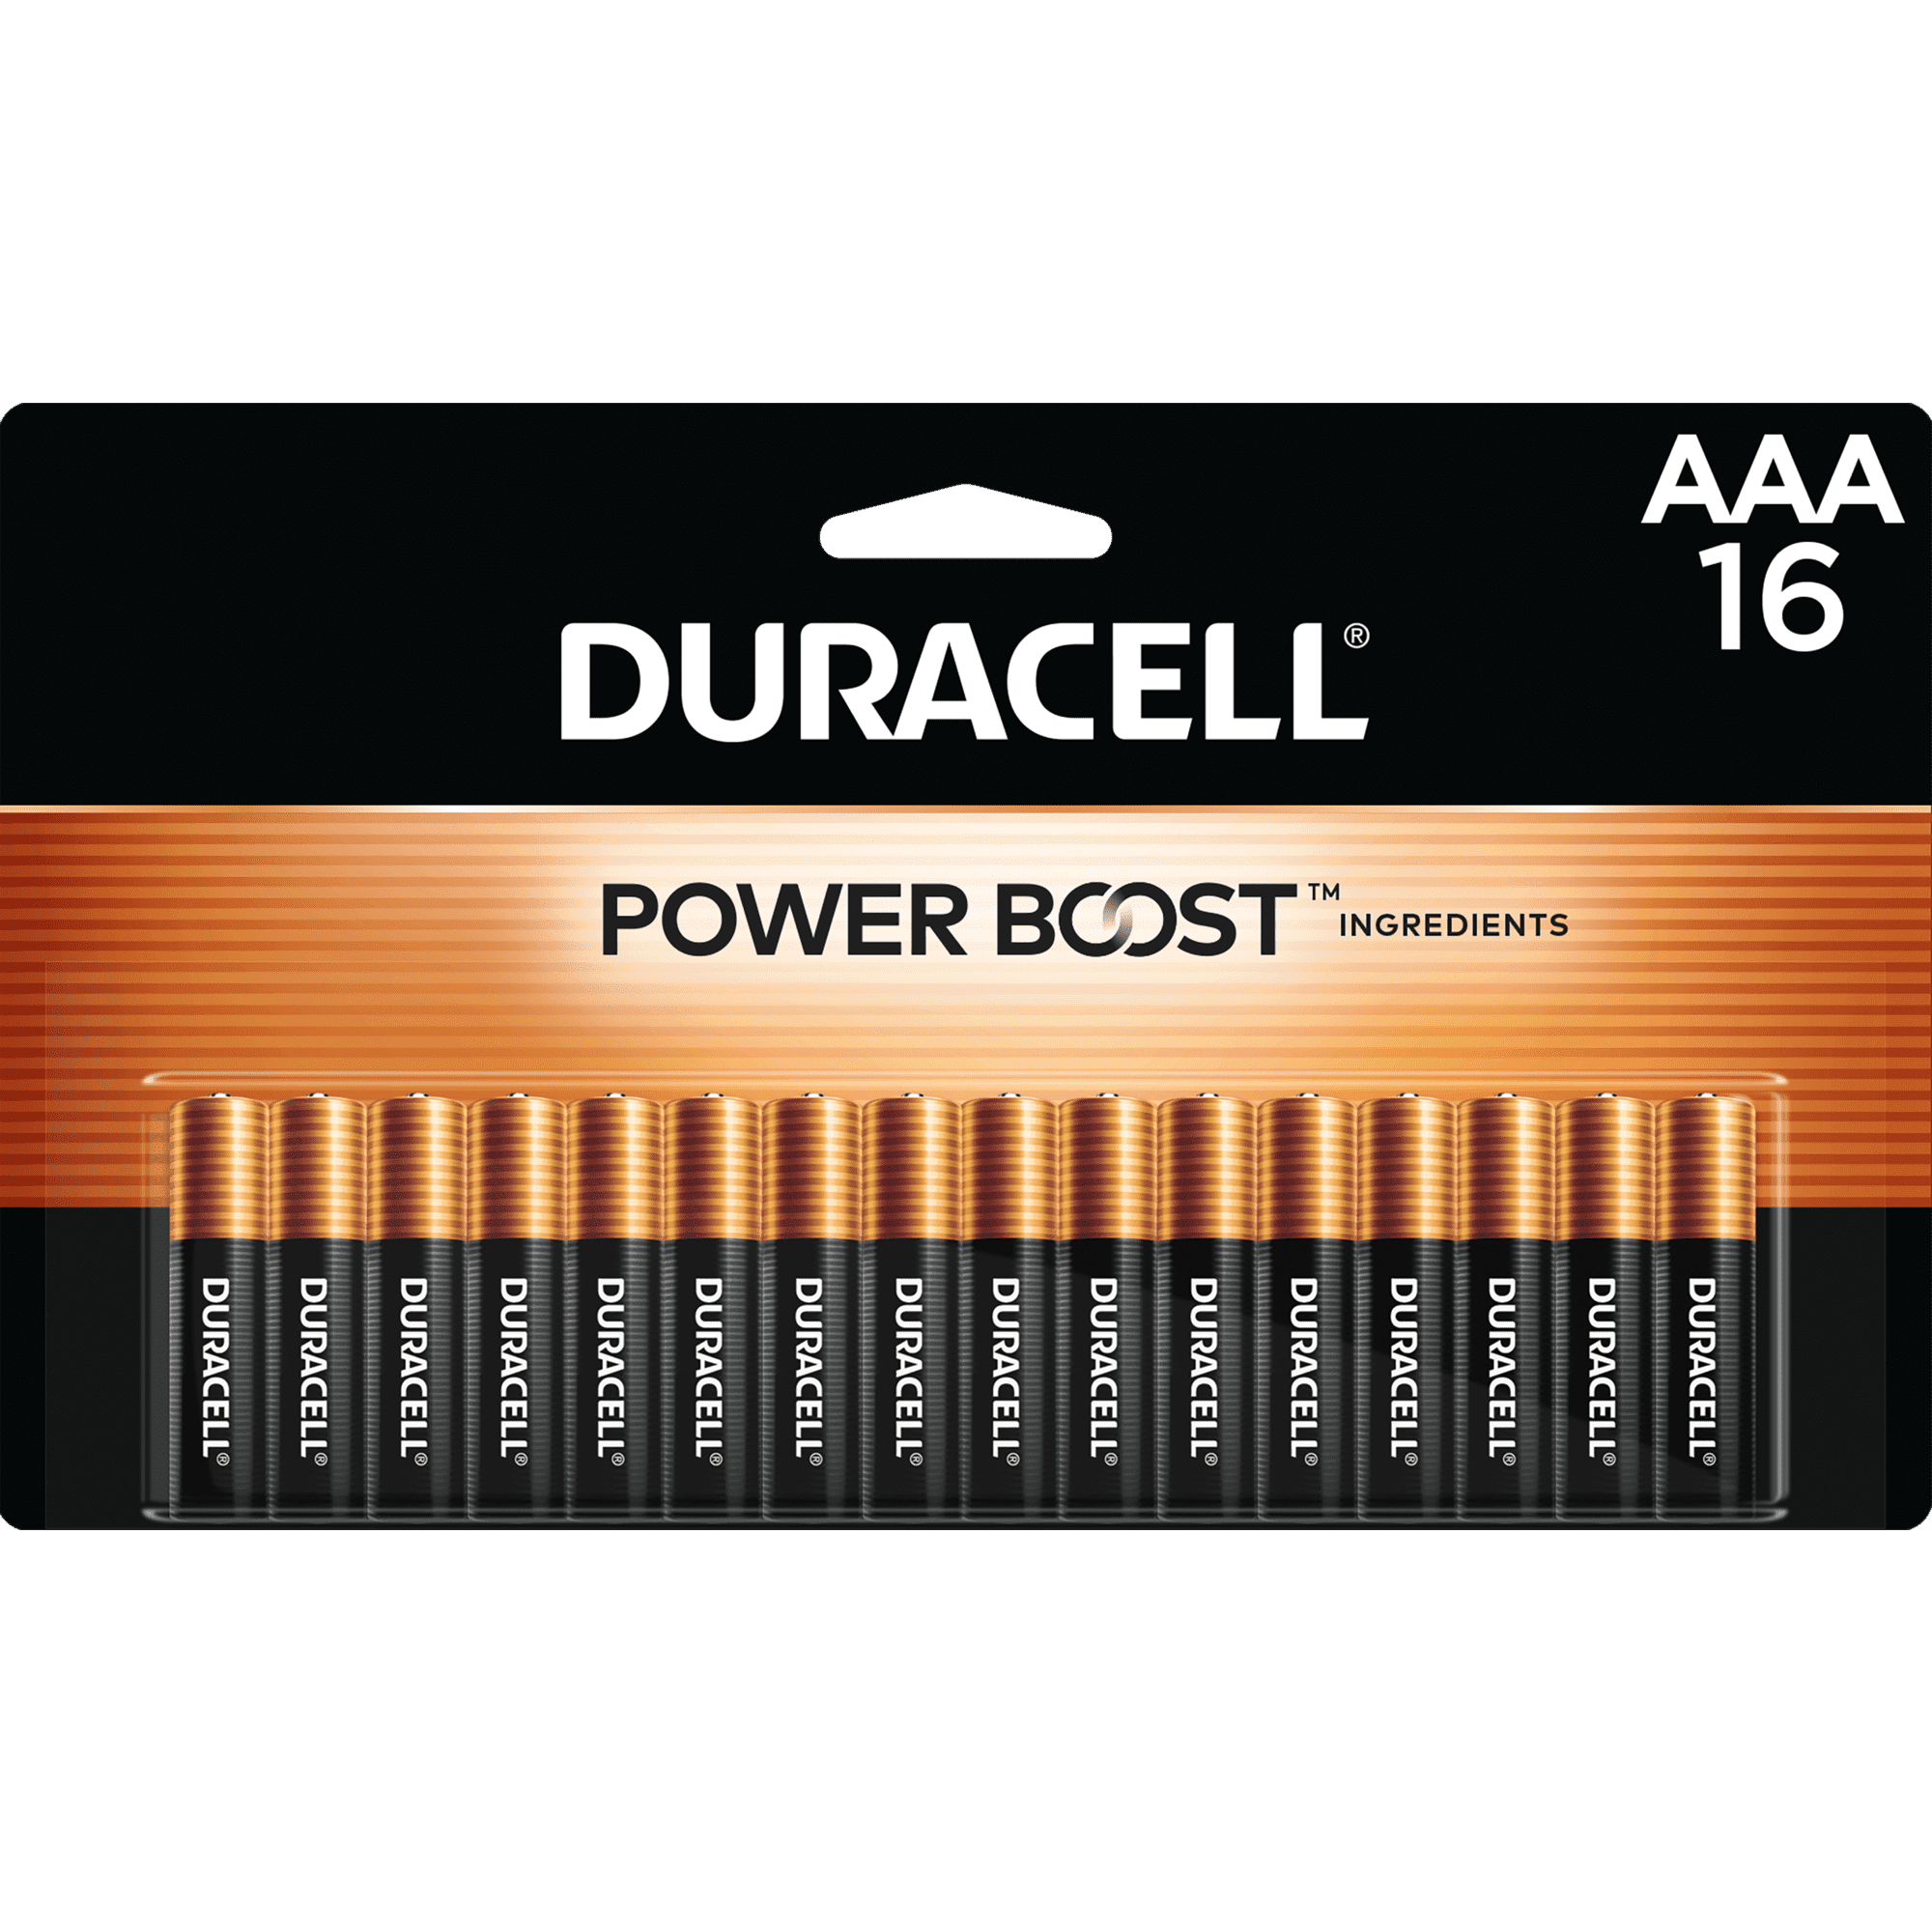 Duracell Coppertop AAA Battery with POWER BOOST™, 16 Pack Long